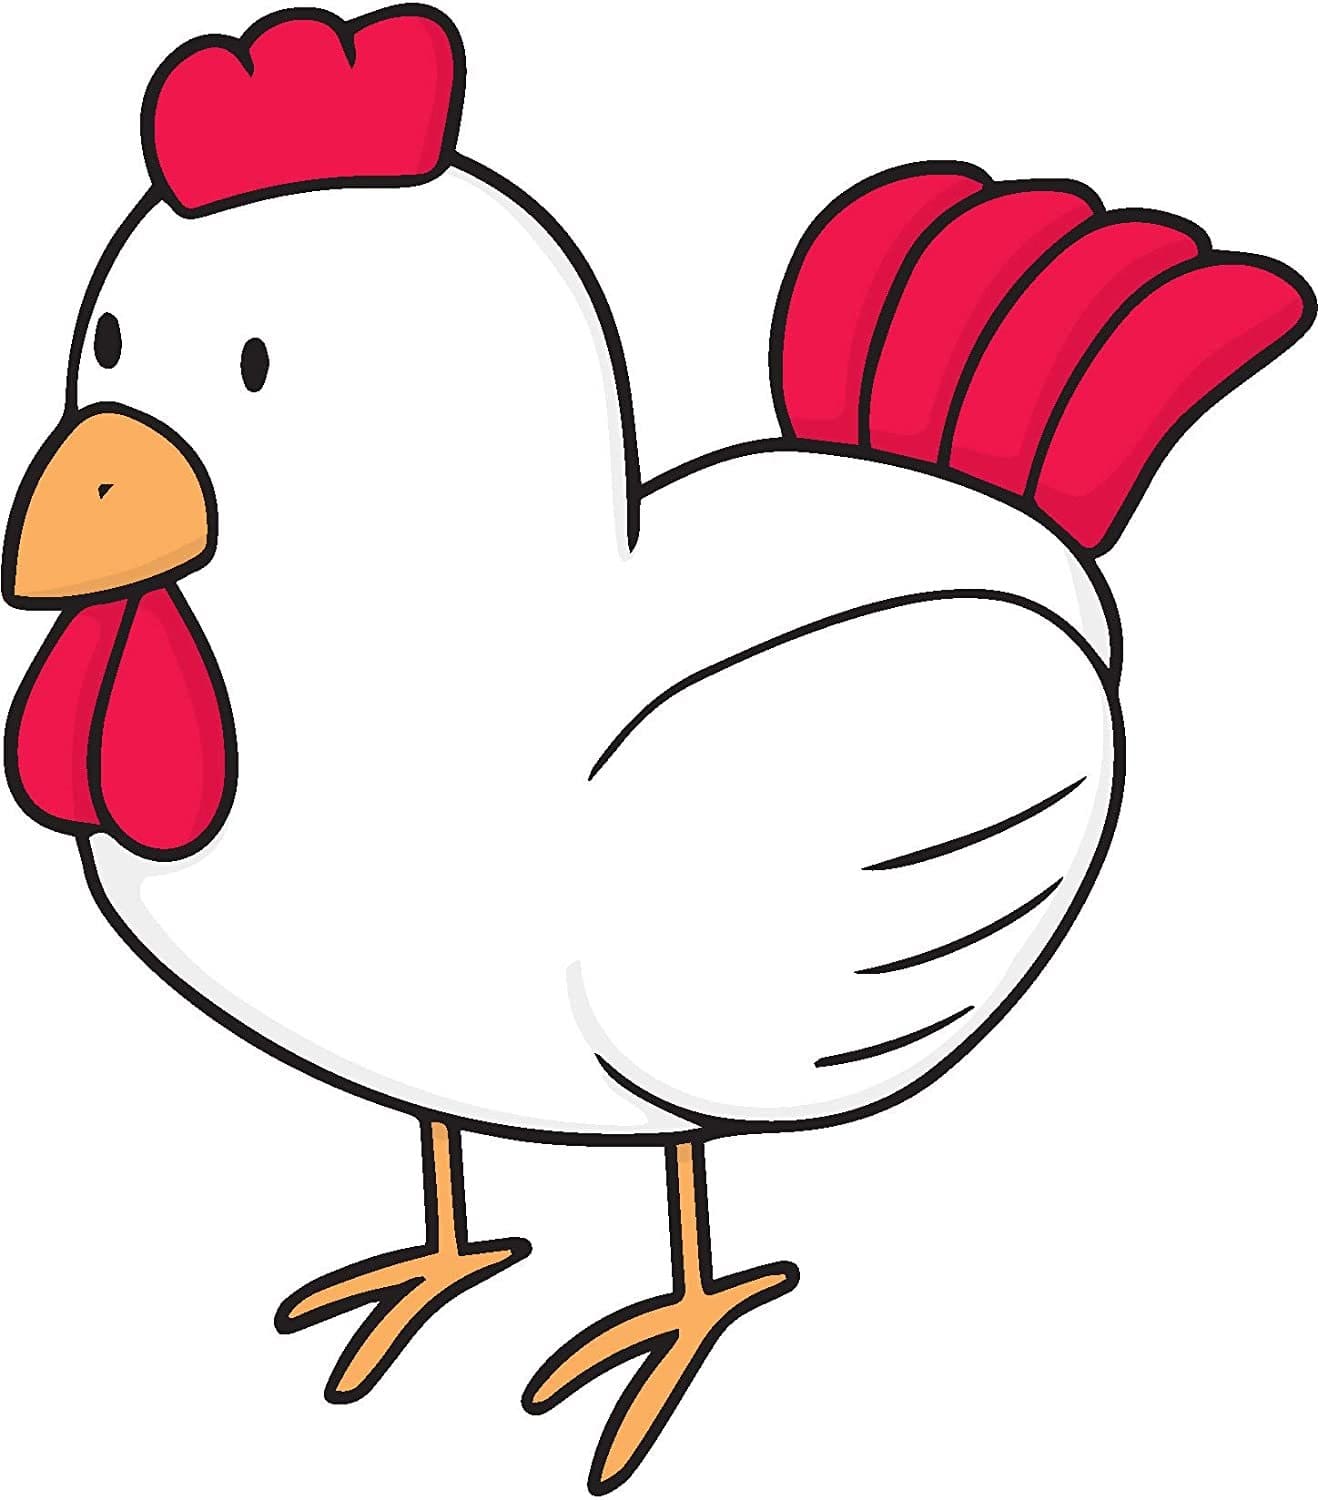 232 Simple Chicken Drawing Stock Photos HighRes Pictures and Images   Getty Images